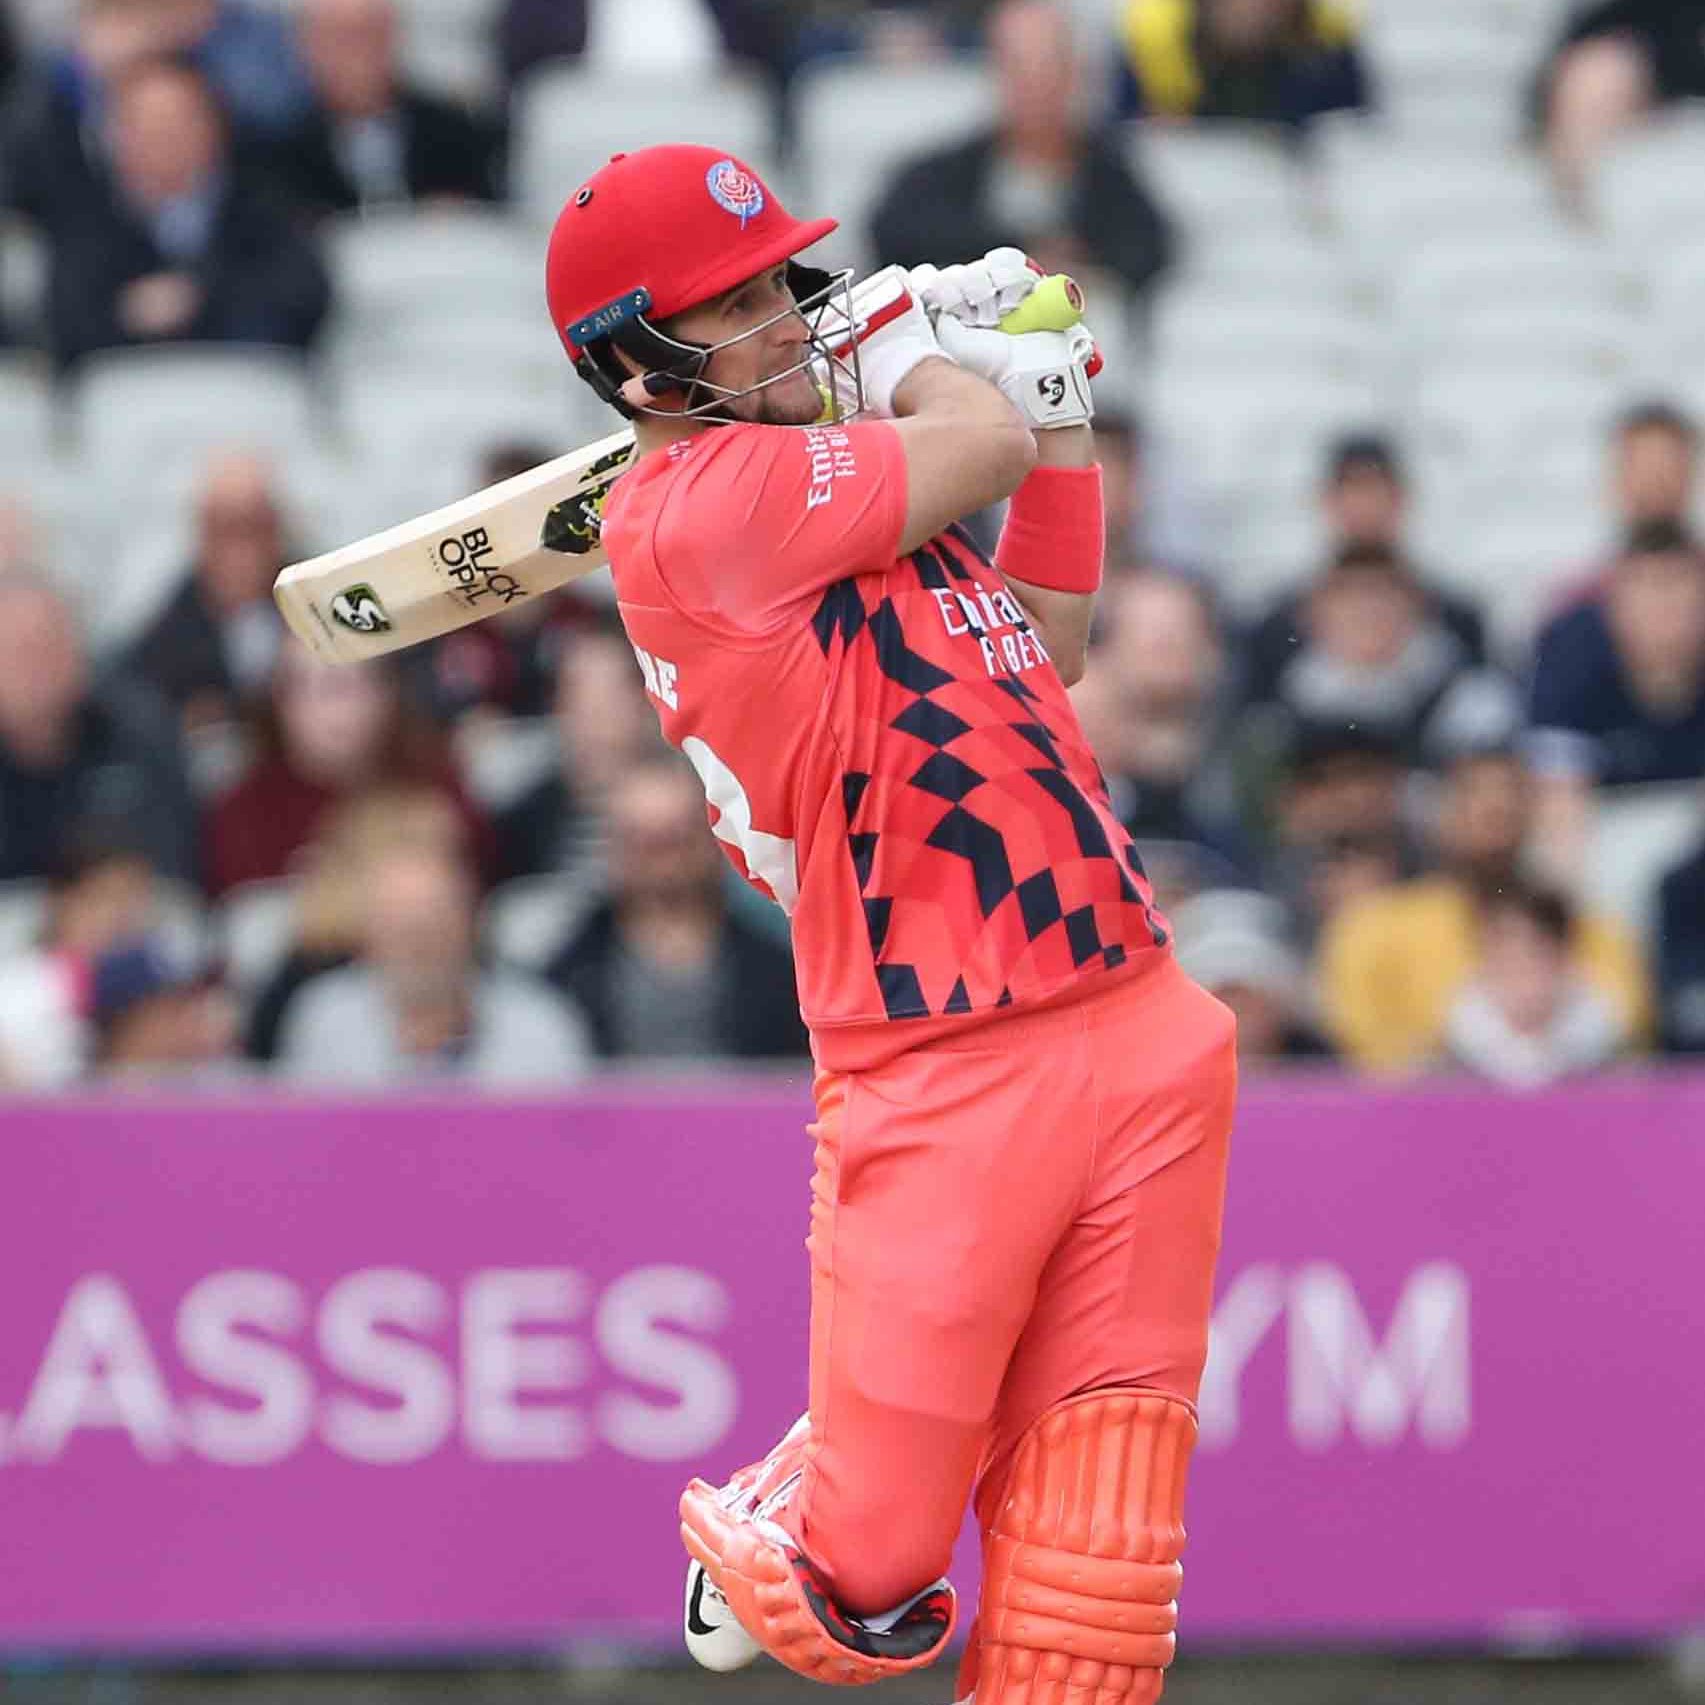 WATCH | Construction workers retrieve ball after Liam Livingstone's humongous six in T20 Blast